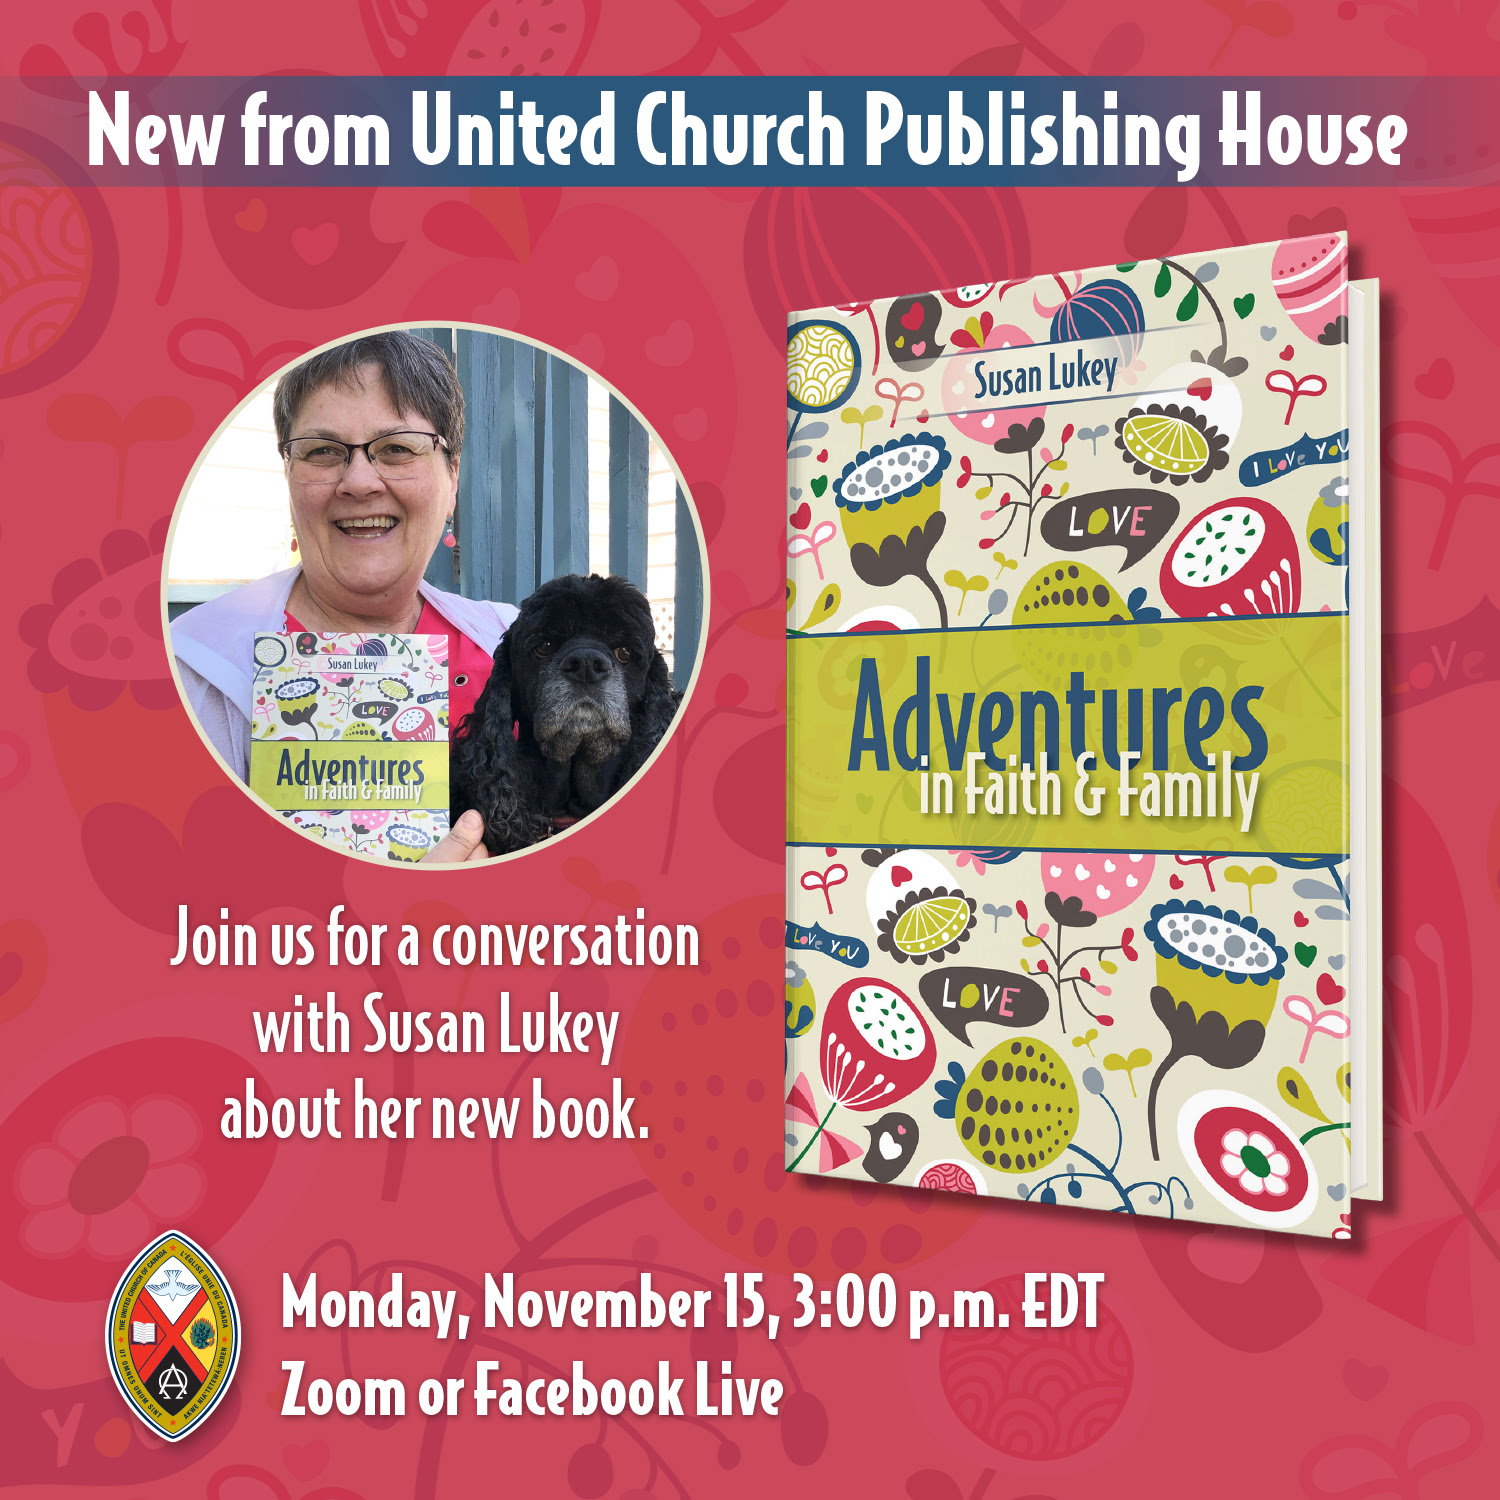 Graphic image promoting the event, featuring a photo of Susan and her dog, and an image of the book cover.